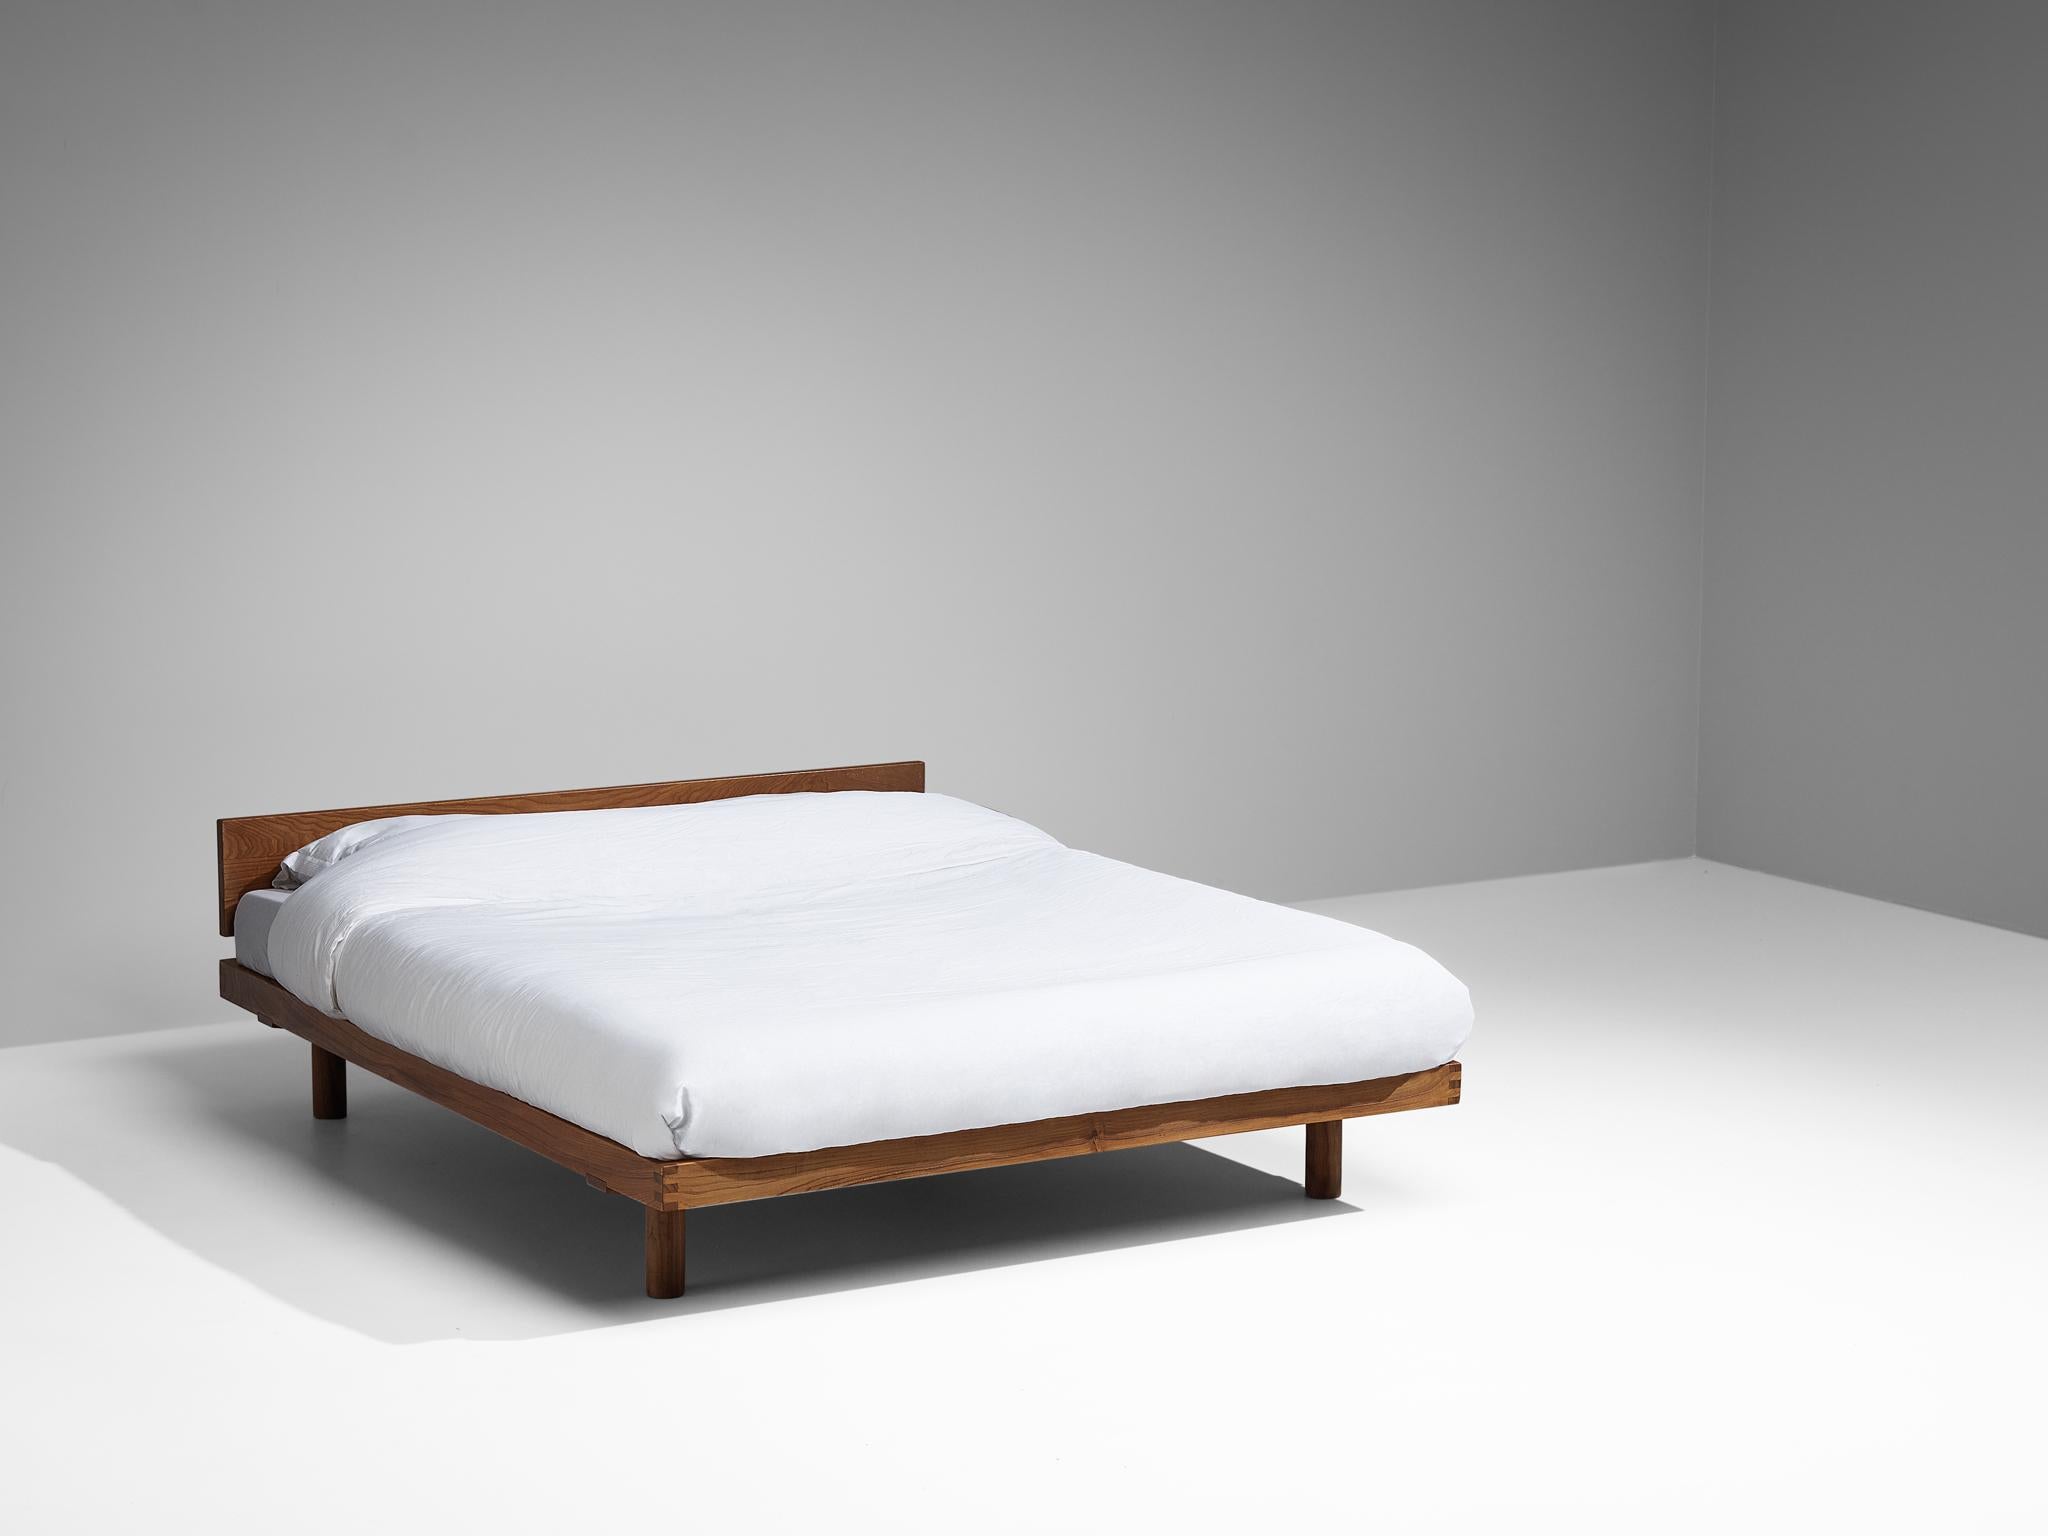 Pierre Chapo, 'Godot' queen bed or daybed, model 'L01L', elm, France, design 1959.

This table is one of the early editions designed by Pierre Chapo, known for his hallmark use of solid elmwood and a commitment to pure and clean design and